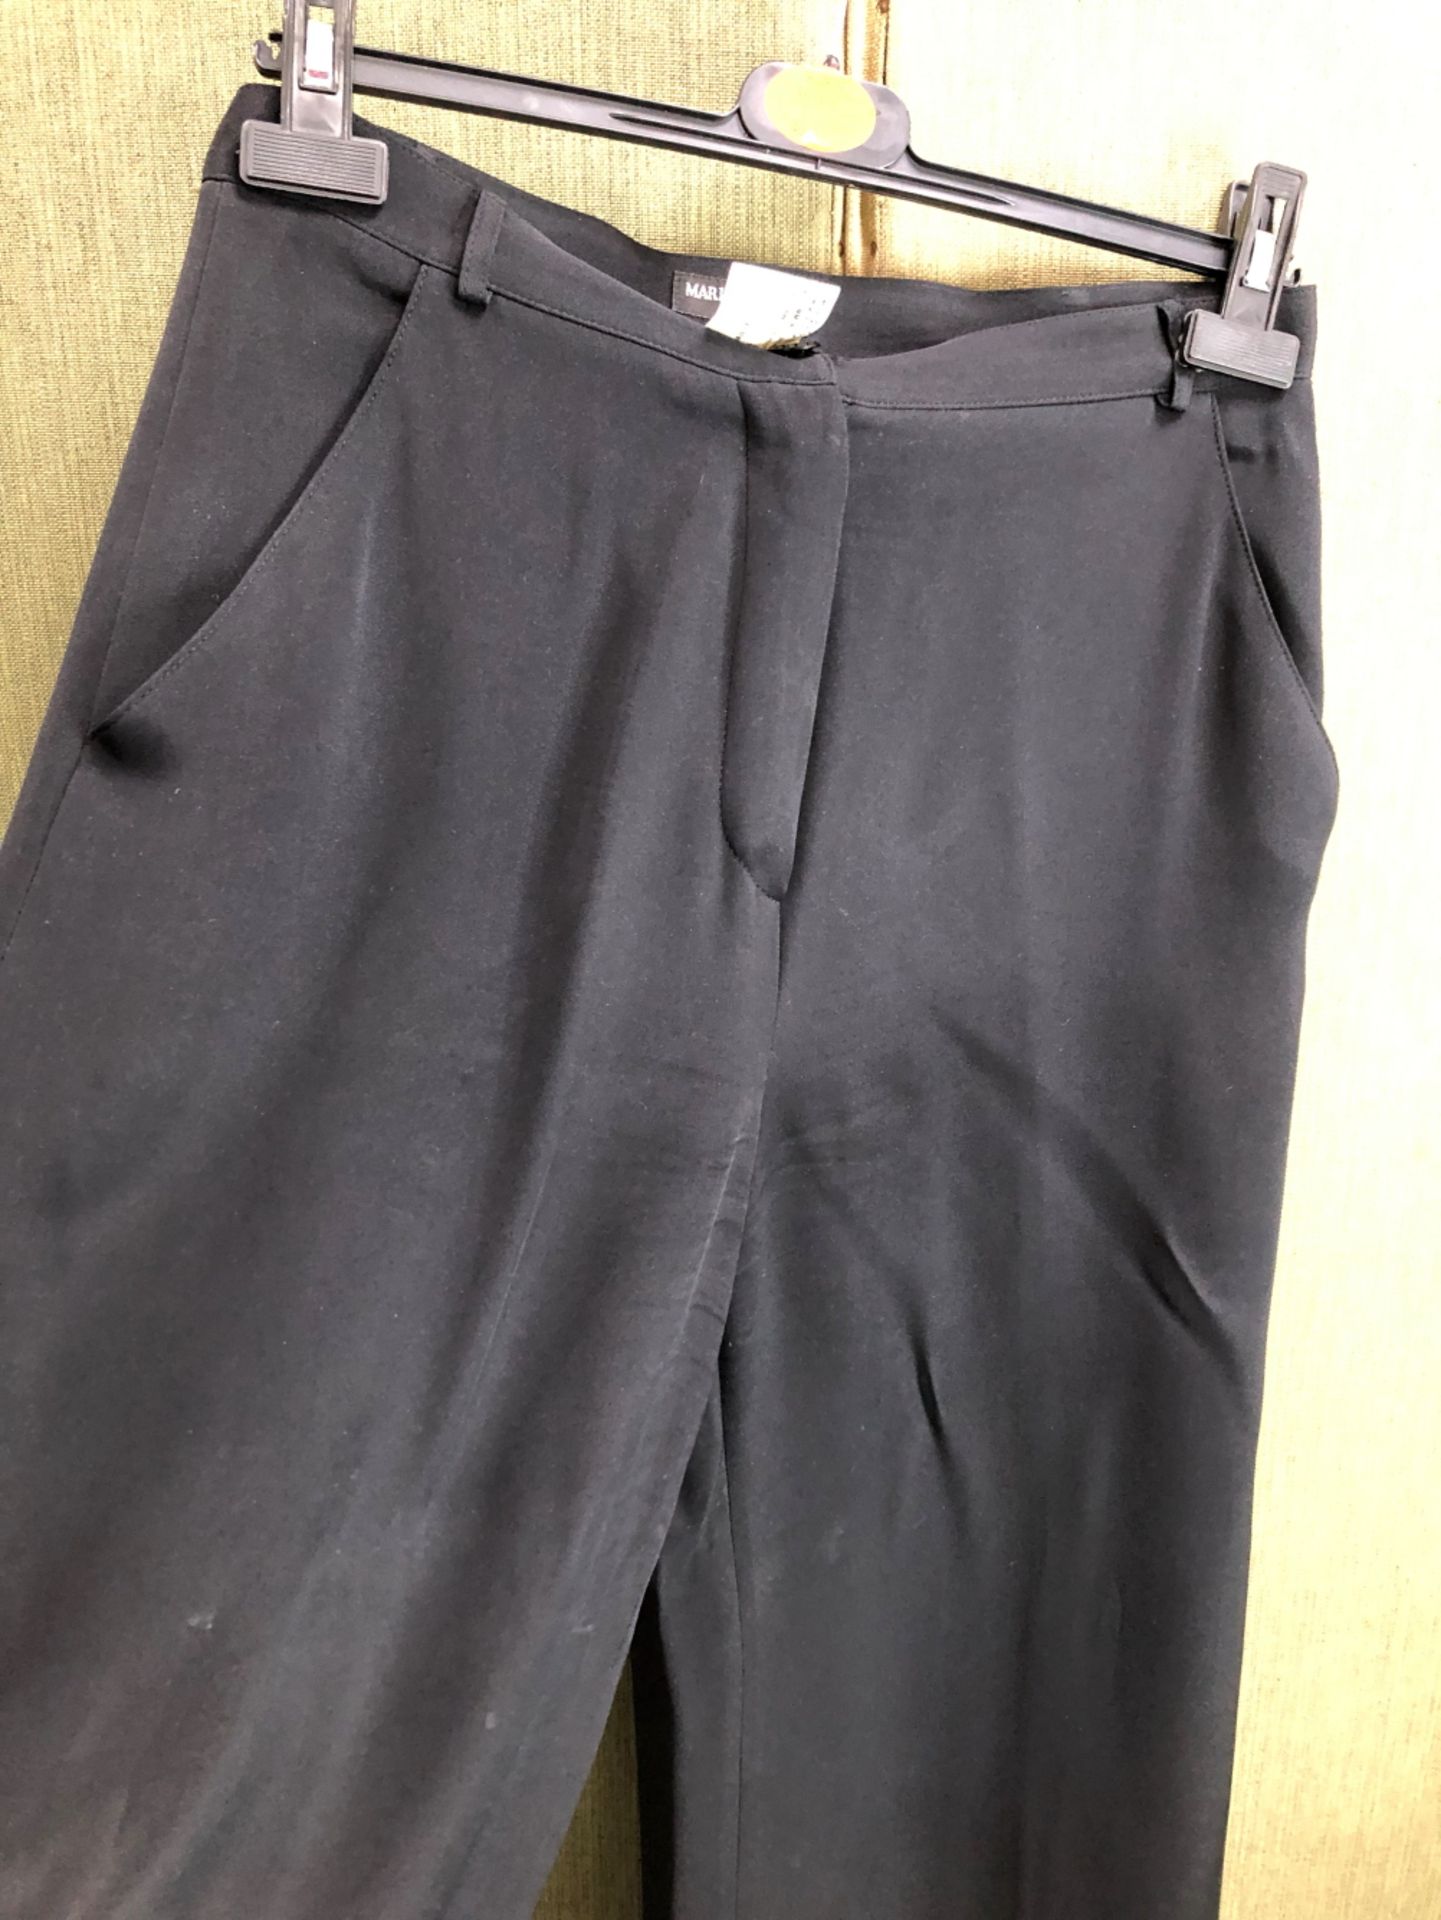 A PAIR OF WIDE LEGGED BLACK TROUSERS BY MARIO BORSATO COUTURE SIZE 44 AND A BLACK MARIO BORSATO - Image 18 of 25